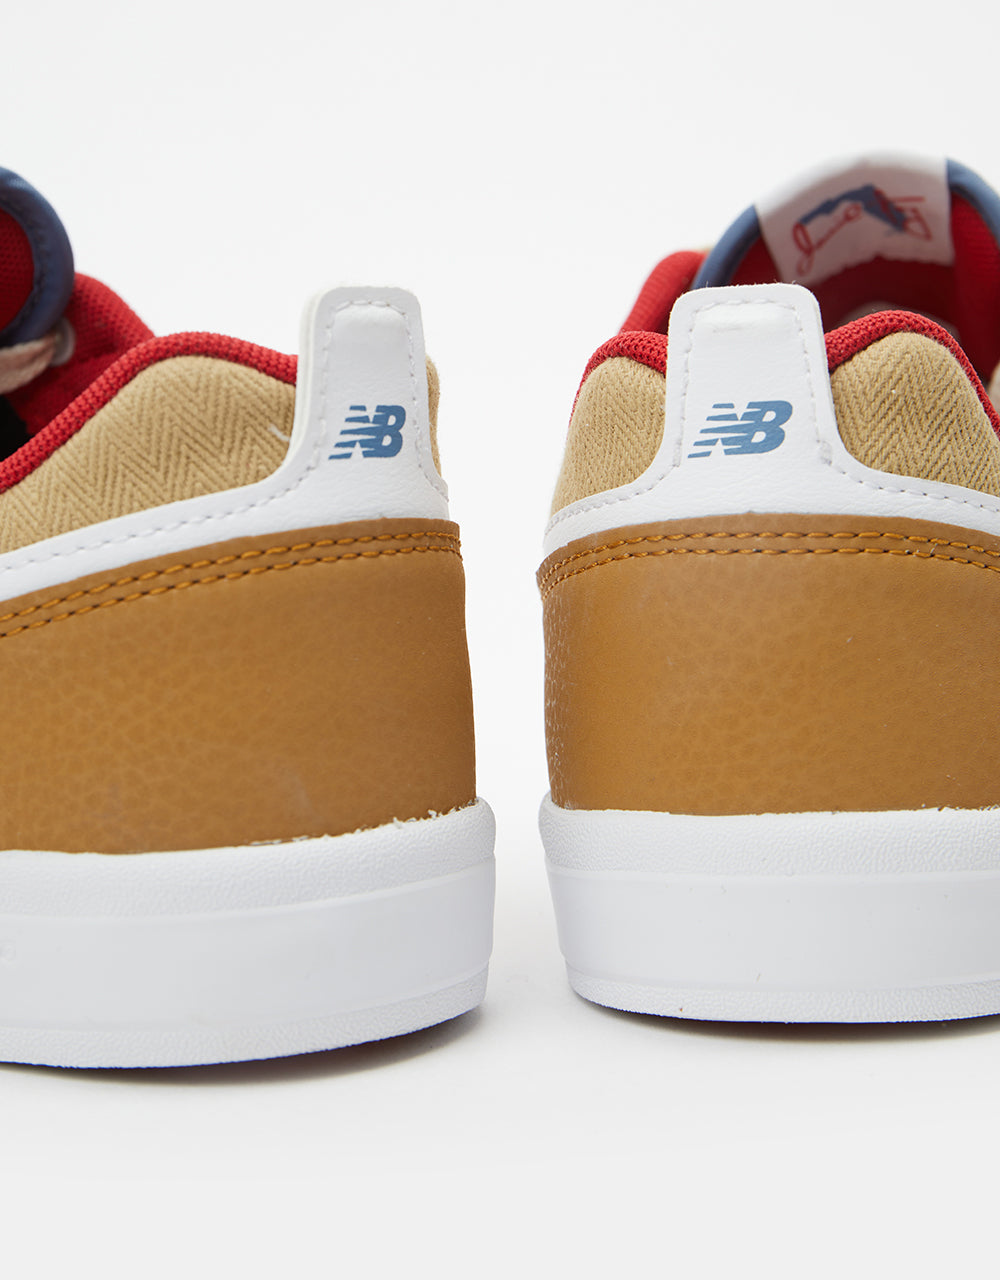 New Balance Numeric 306 Skate Shoes - Tan/Red